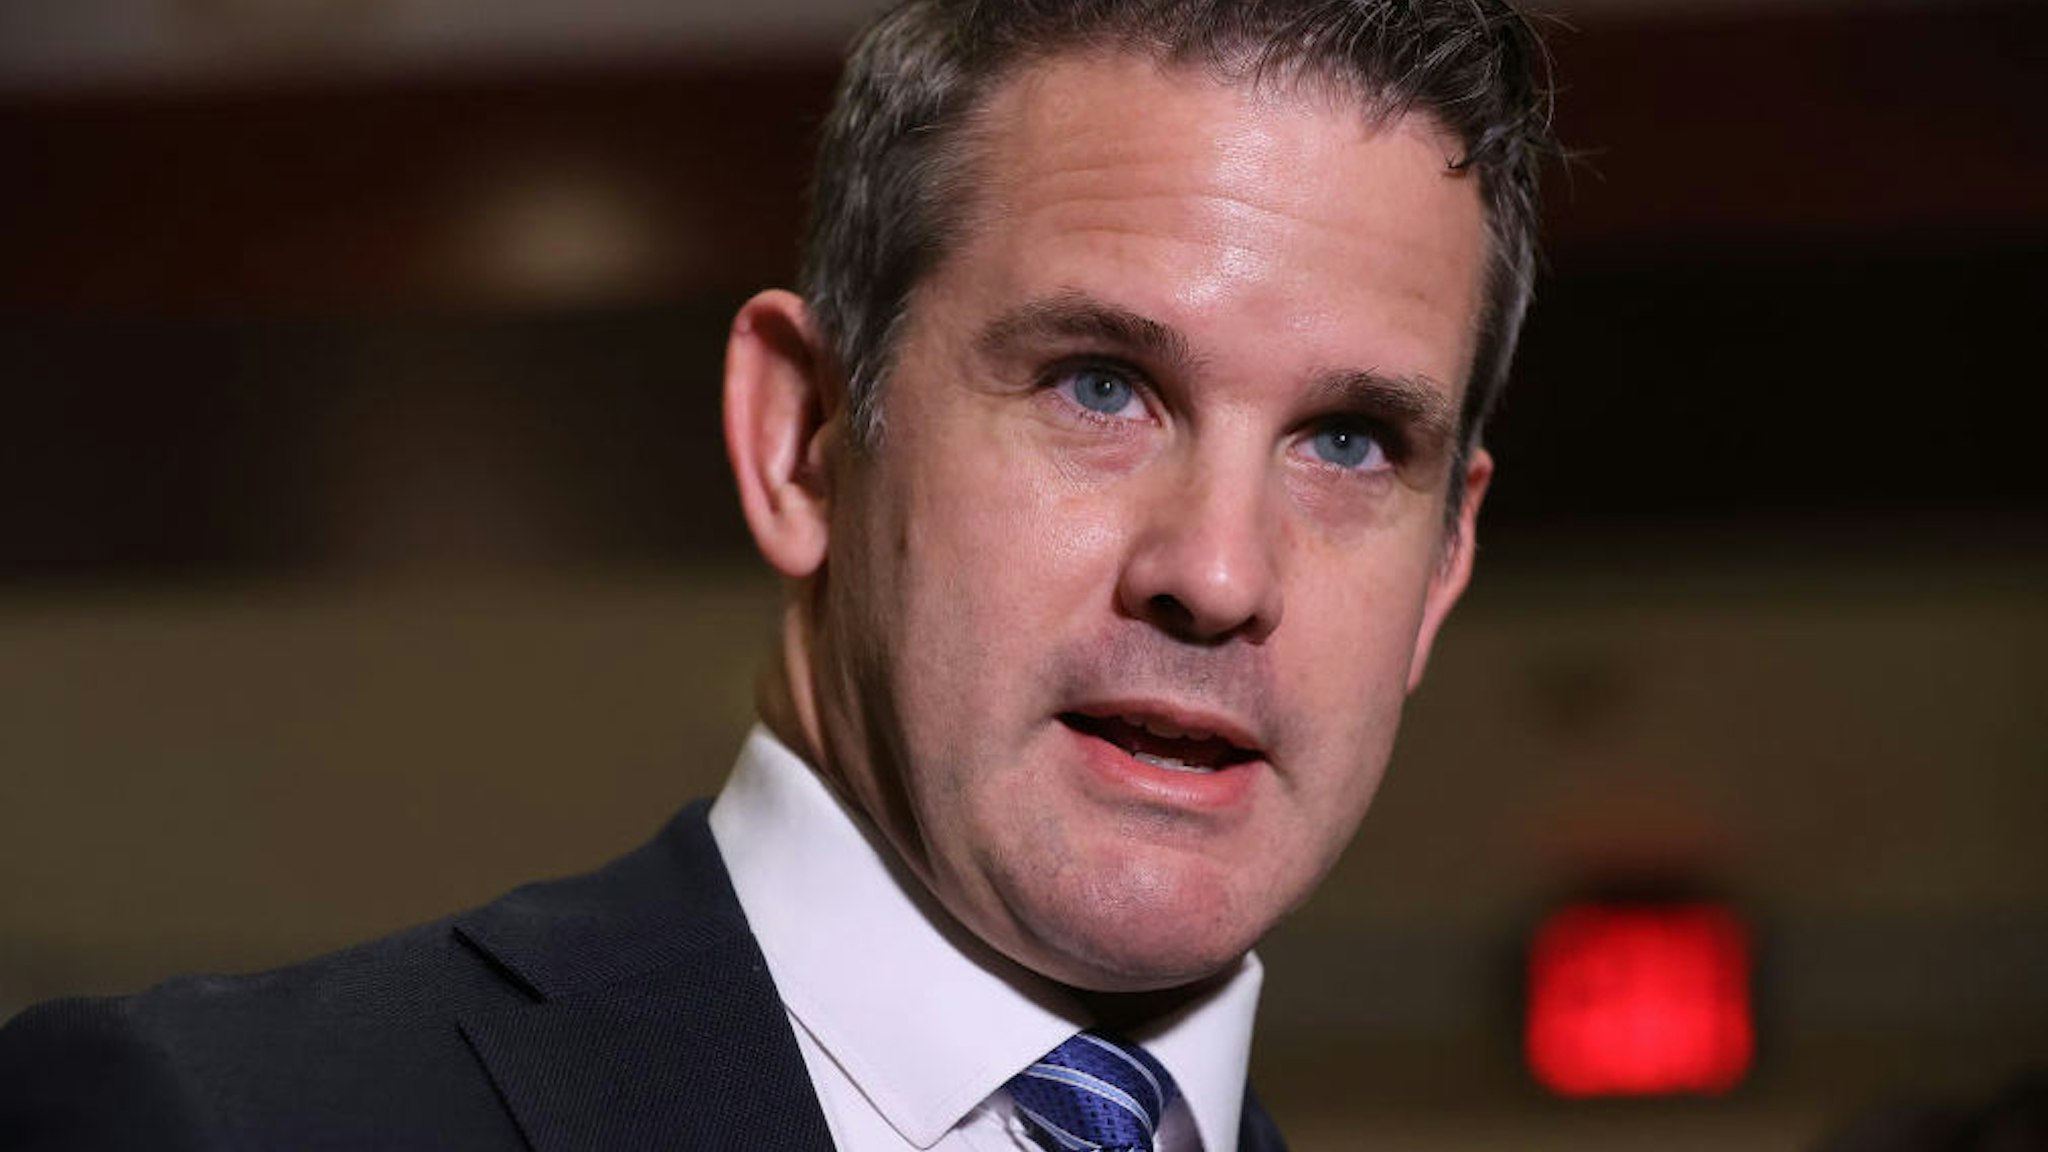 WASHINGTON, DC - MAY 12: Rep. Adam Kinzinger (R-IL) talks to reporters follow a House Republican conference meeting in the U.S. Capitol Visitors Center on May 12, 2021 in Washington, DC. GOP members decided to remove Conference Chair Liz Cheney (R-WY) from her leadership position after she become a target for former President Donald Trump and his followers in the House as she has continually expressed the need for the Republican Party to separate themselves from Trump over his role in the January 6 attack on the Capitol.